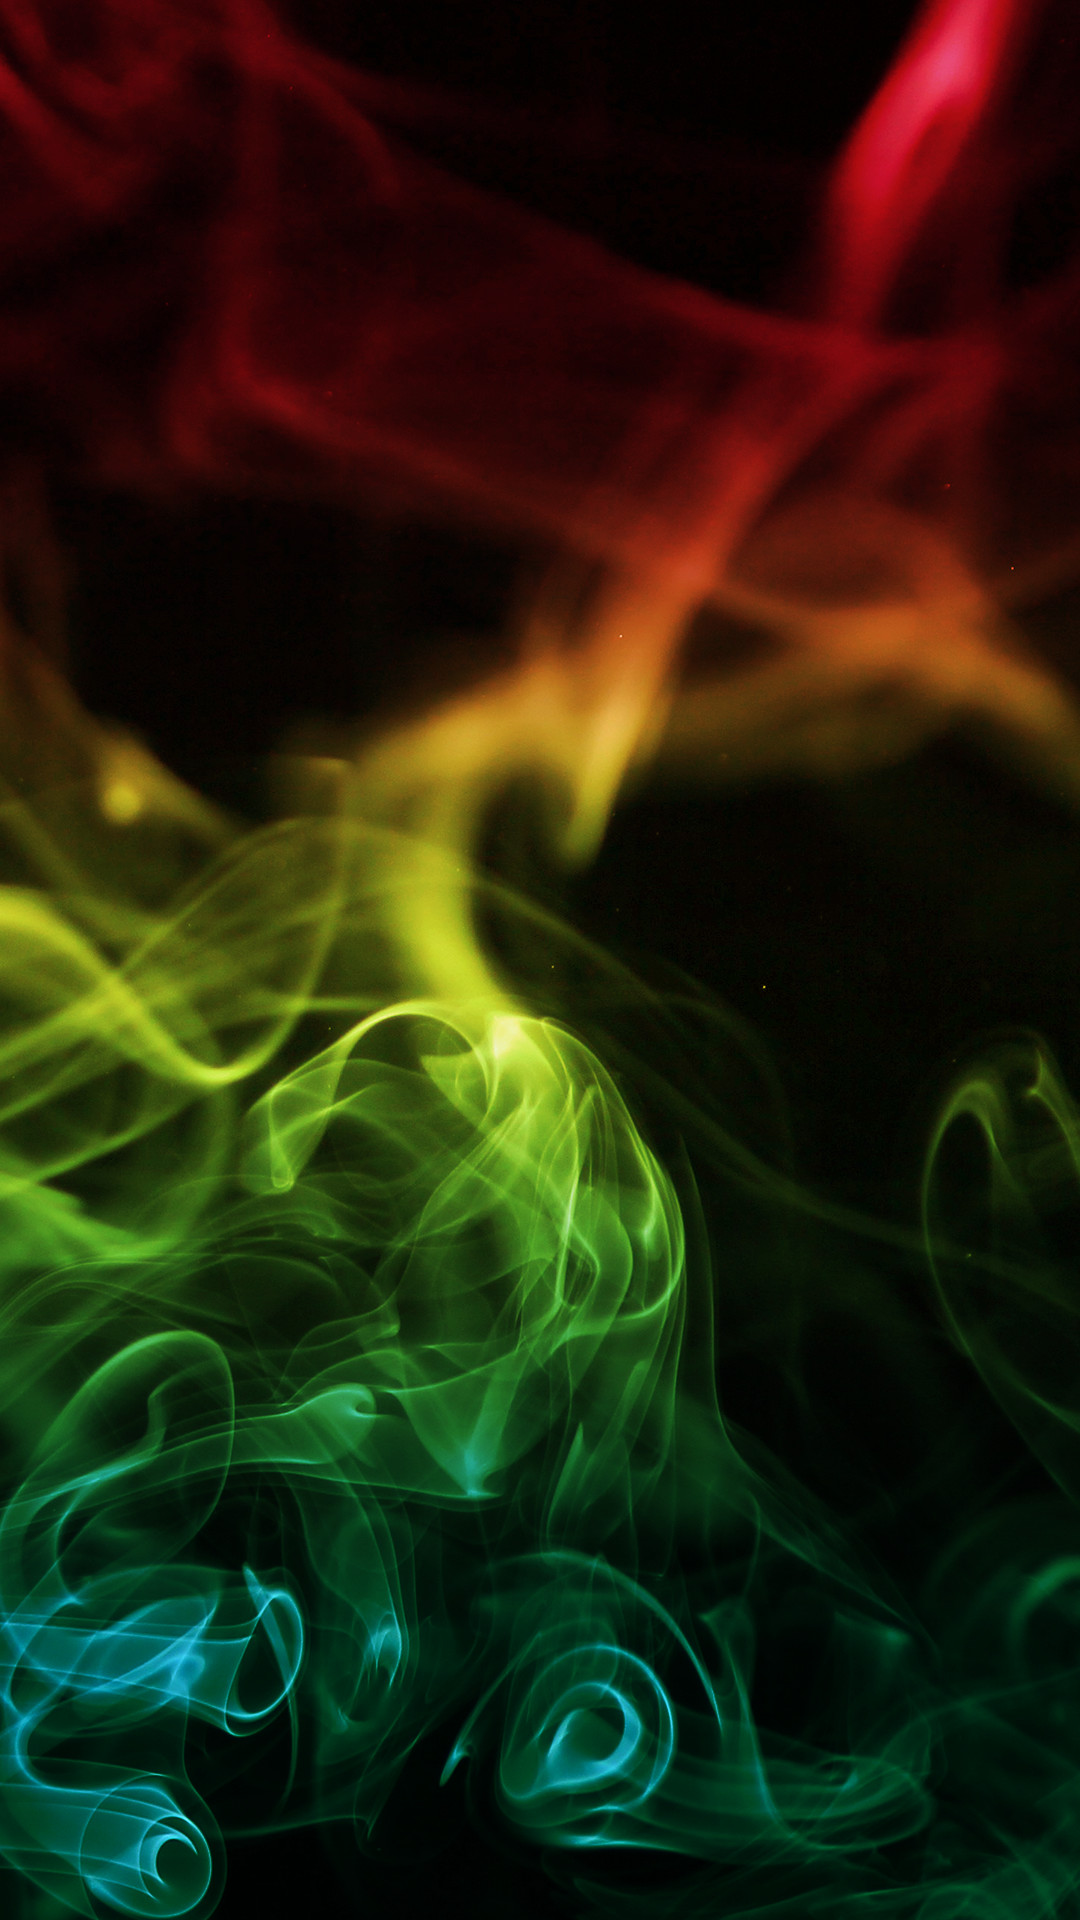 1080x1920 Colorful Smoke. Beautiful abstract iPhone wallpapers. Tap to see more! -  @mobile9